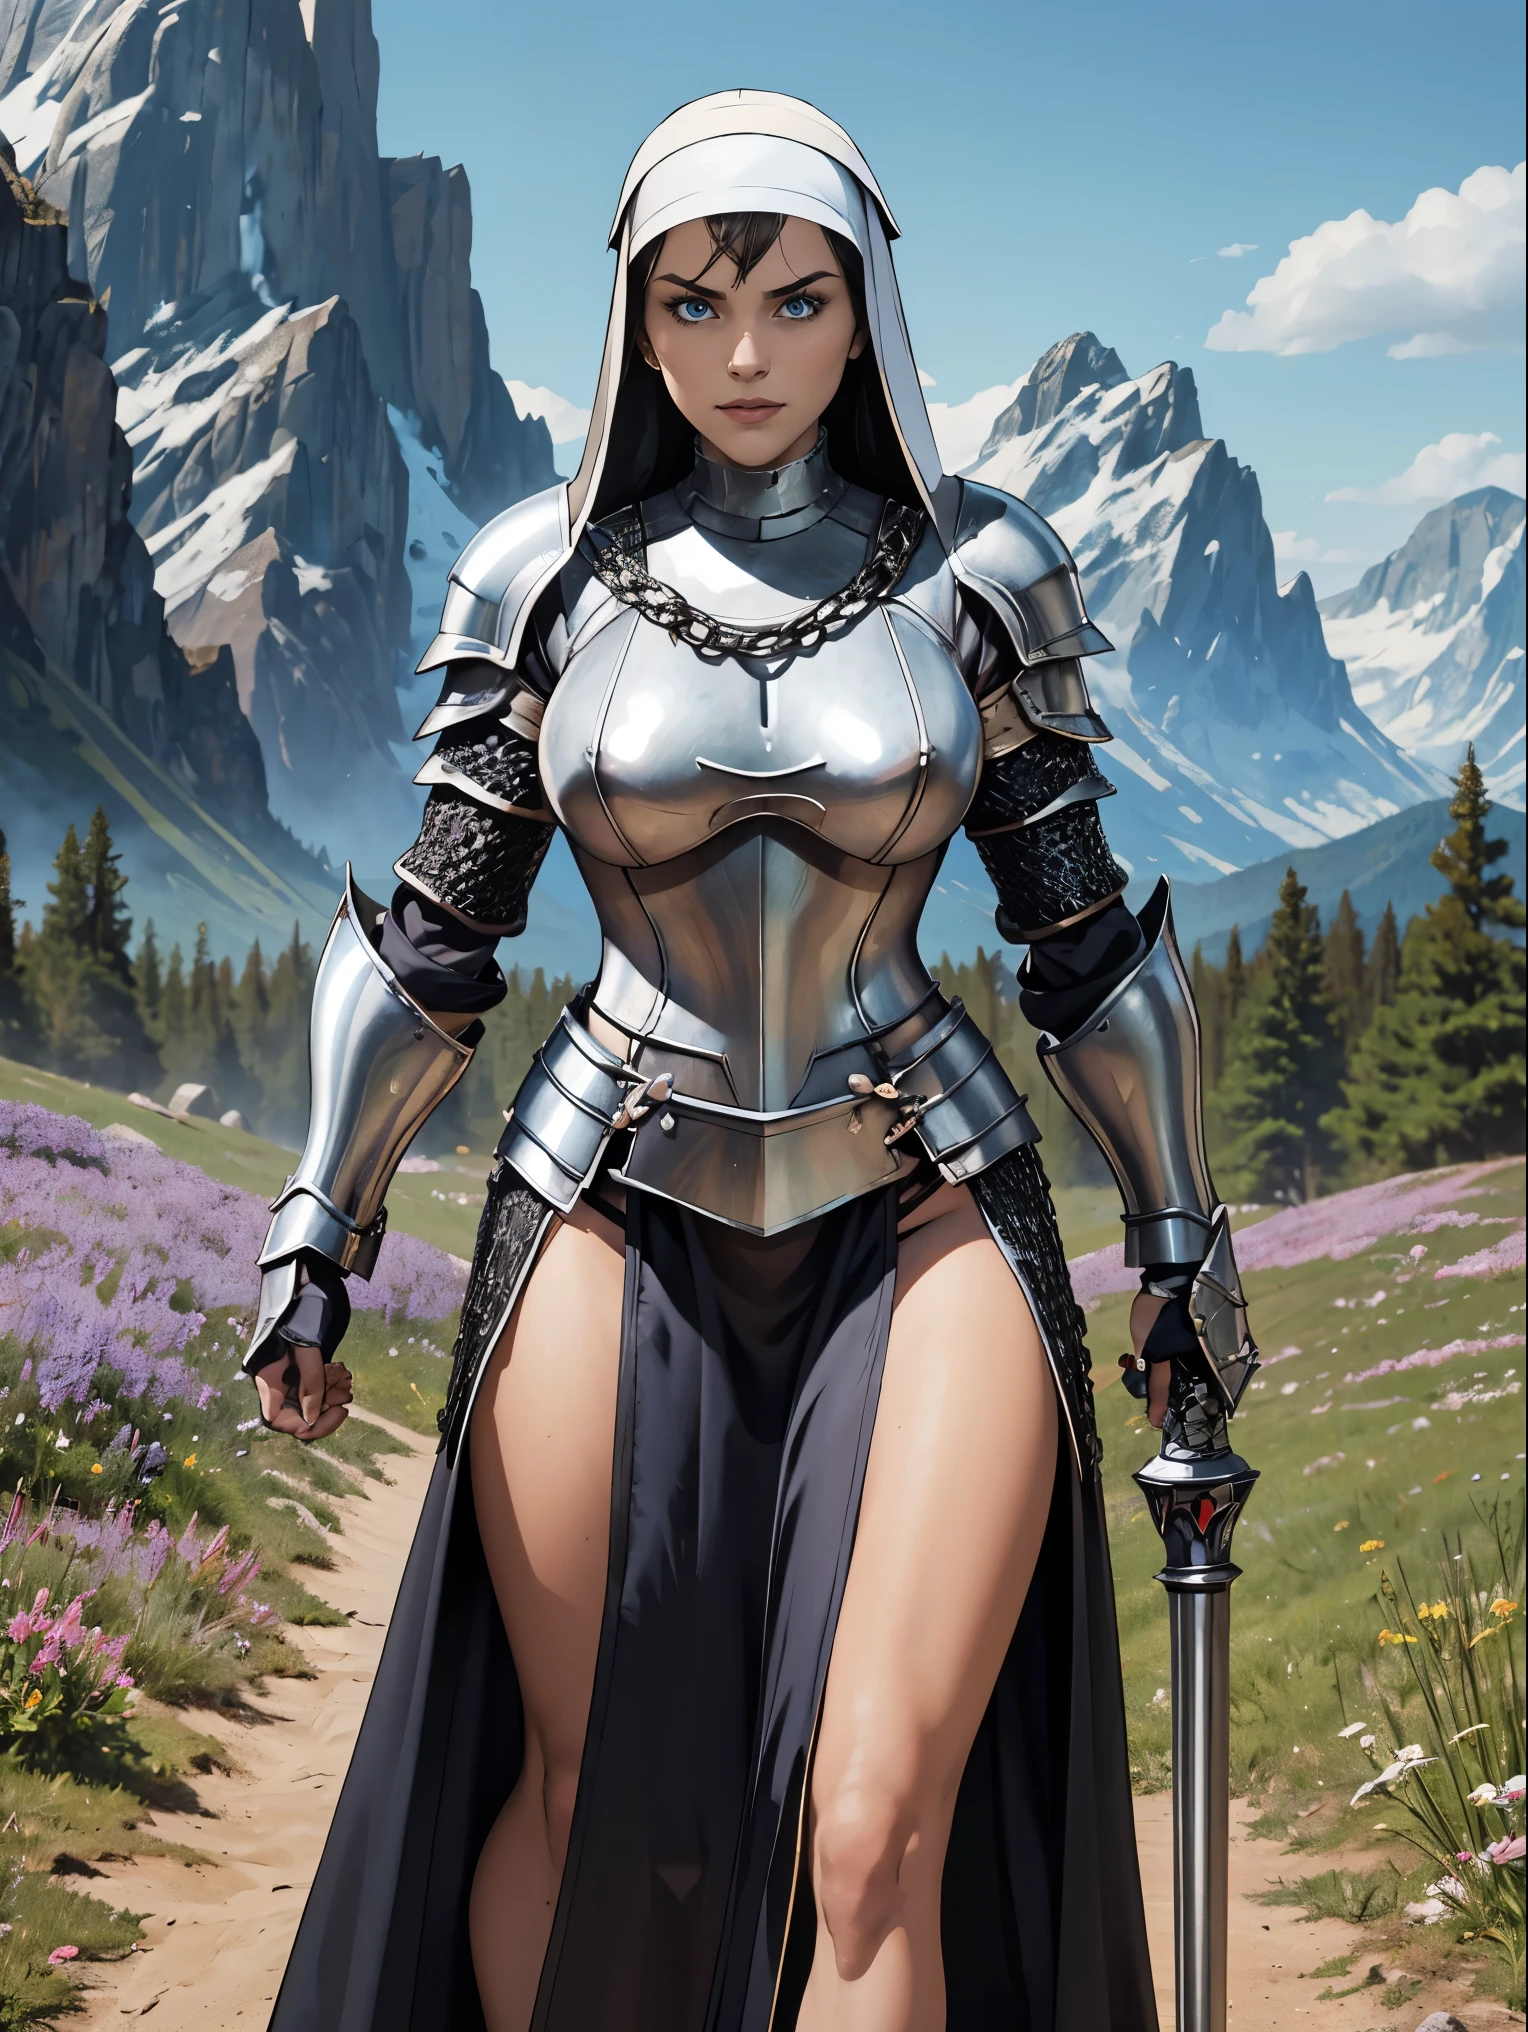 (masterpiece, top quality, best quality, official art, beautiful and aesthetic:1.2), (1girl:1.3), ((Sharp facial features, sharp features, hawkish features)), ((blue eyes)), busty brunette paladin knight girl, extremely detailed, portrait, looking at viewer, solo, (full body:0.6), detailed background, full-body shot, (warm mountain meadow theme:1.1), holy knight, (nun), charlatan, smirk, mysterious, swaying in mountains, armor, polished metal, gold trim, long boots, white fabric, pelvic curtain, robe, pale leather, ((((nun, holy aura, mace, heavy armor, armored, long legs, pelvic curtain, toned, muscular, chainmail)))), slim waist, slim hips, long legs, medieval (mountain exterior:1.1) background, dark mysterious lighting, shadows, magical atmosphere, dutch angle